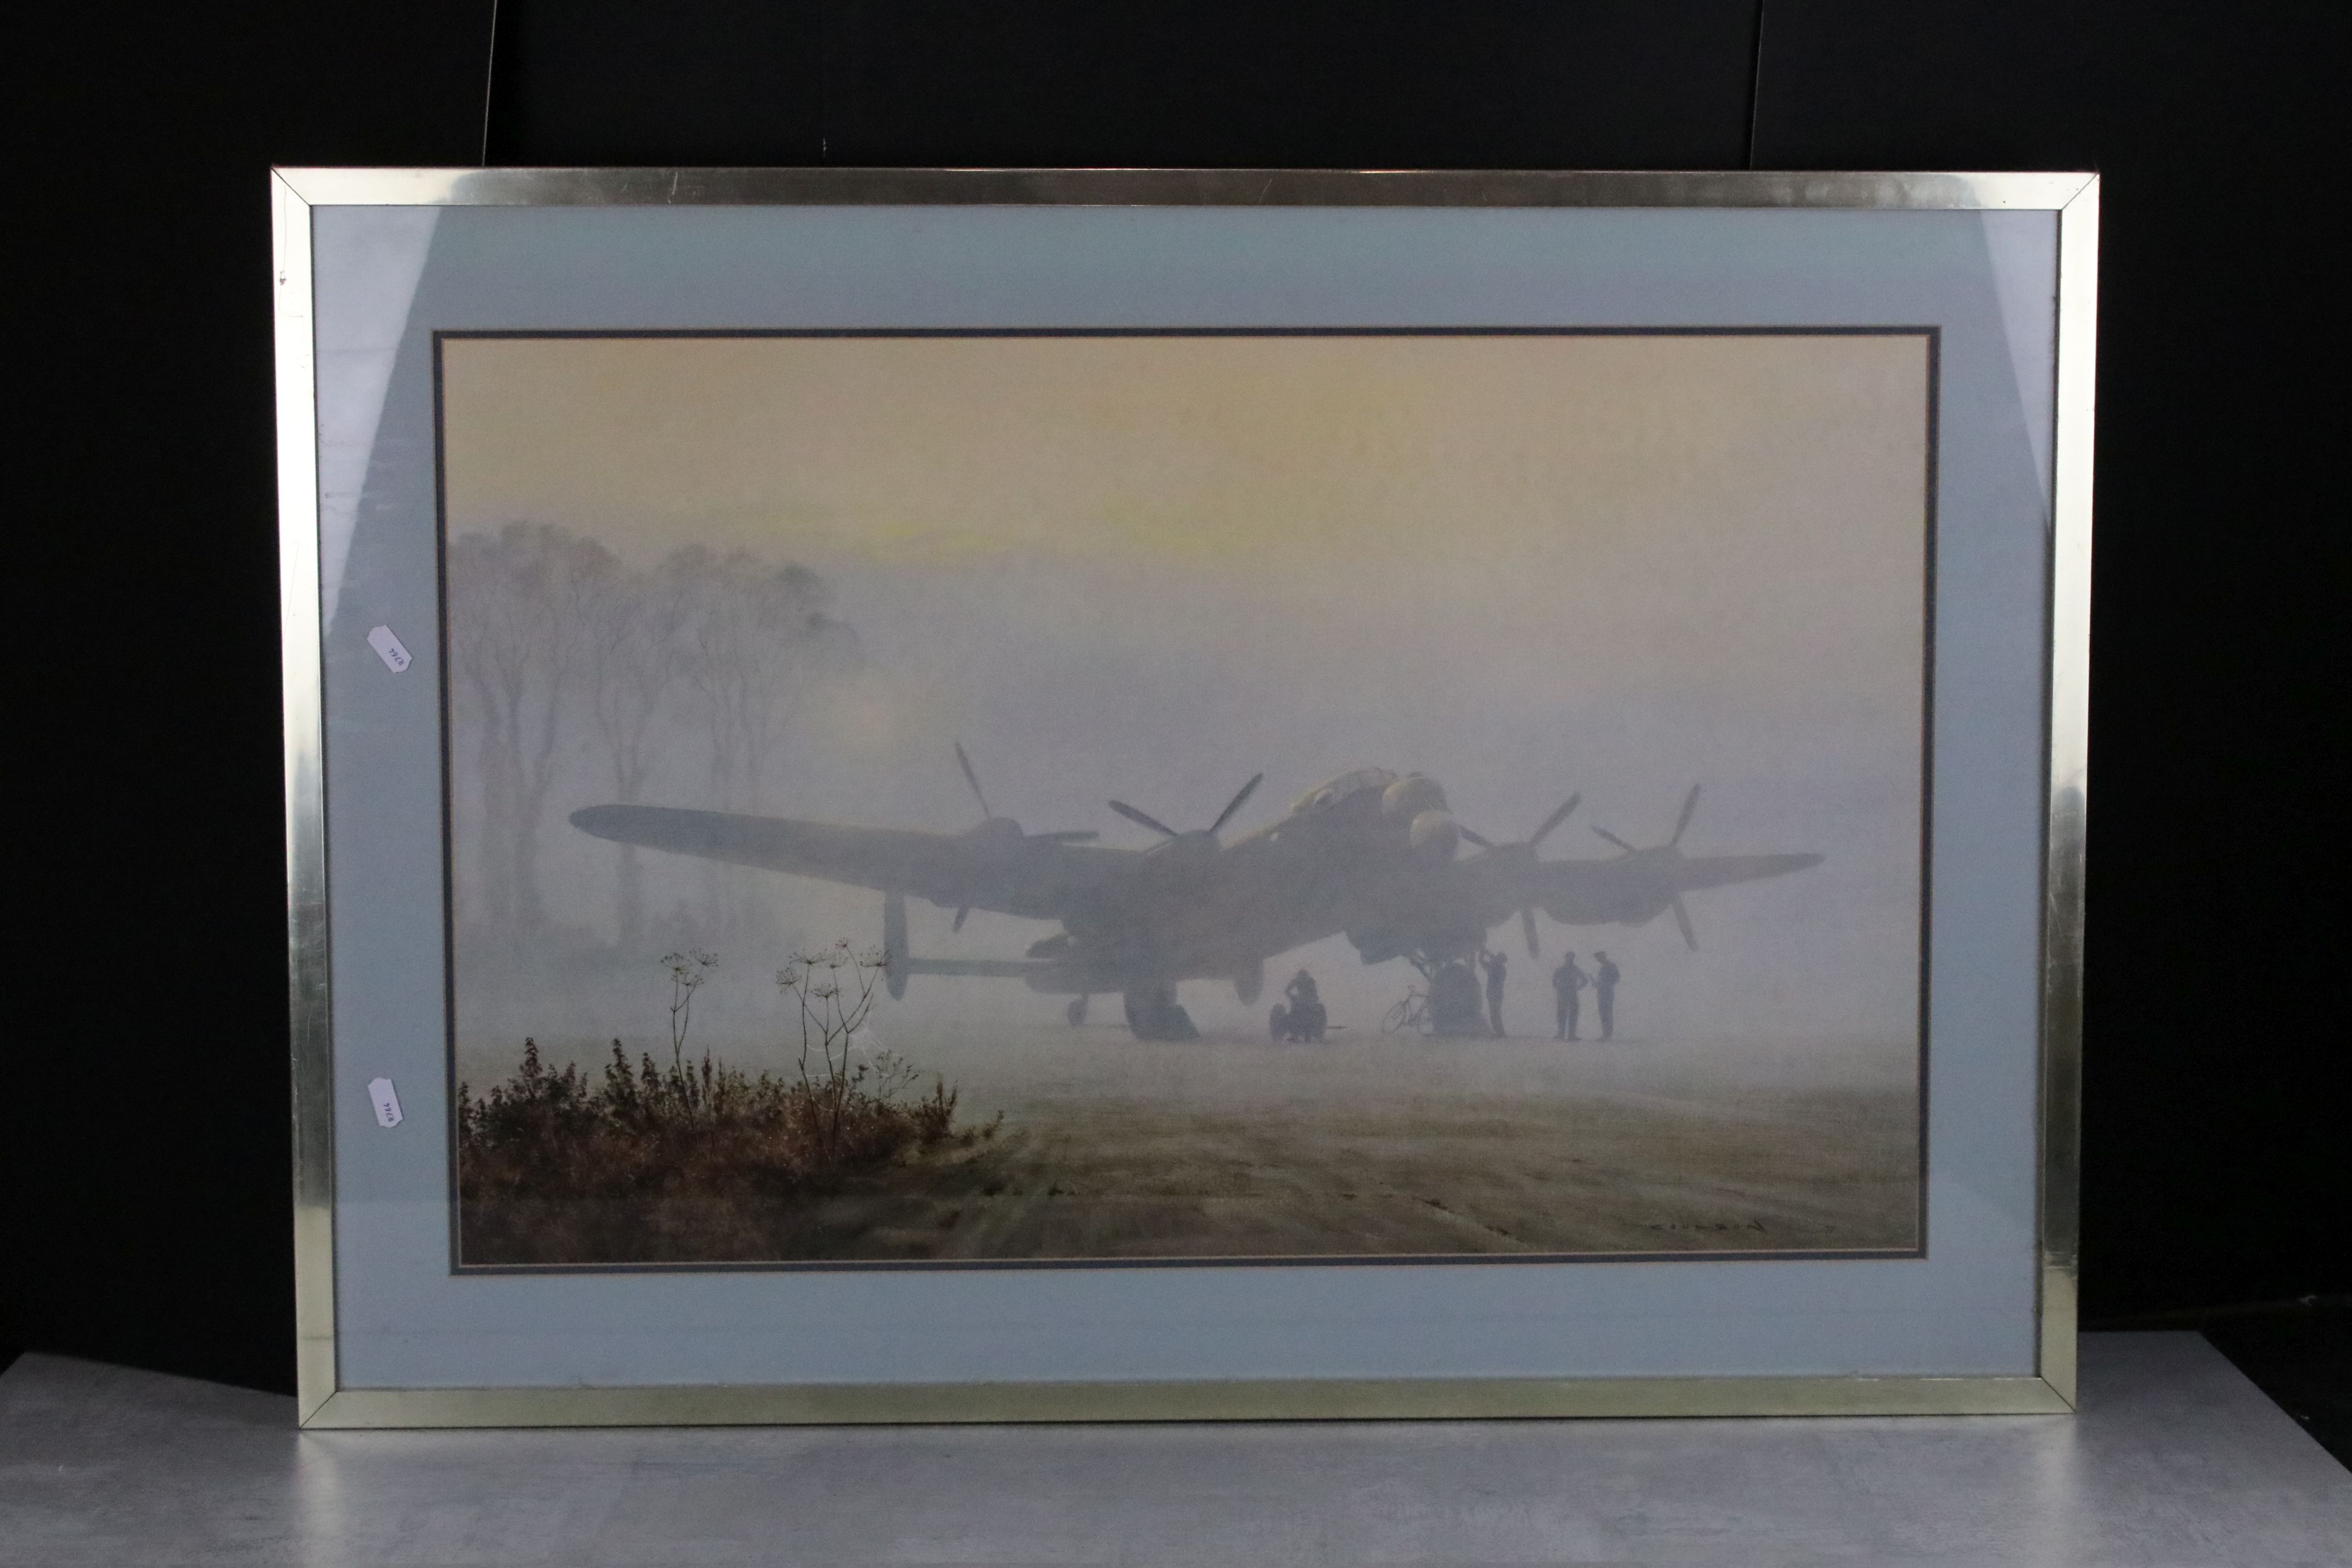 John Brooks (20th century) Oil Painting on Canvas of a Sunderland Flying Boat, signed lower right, - Image 2 of 12